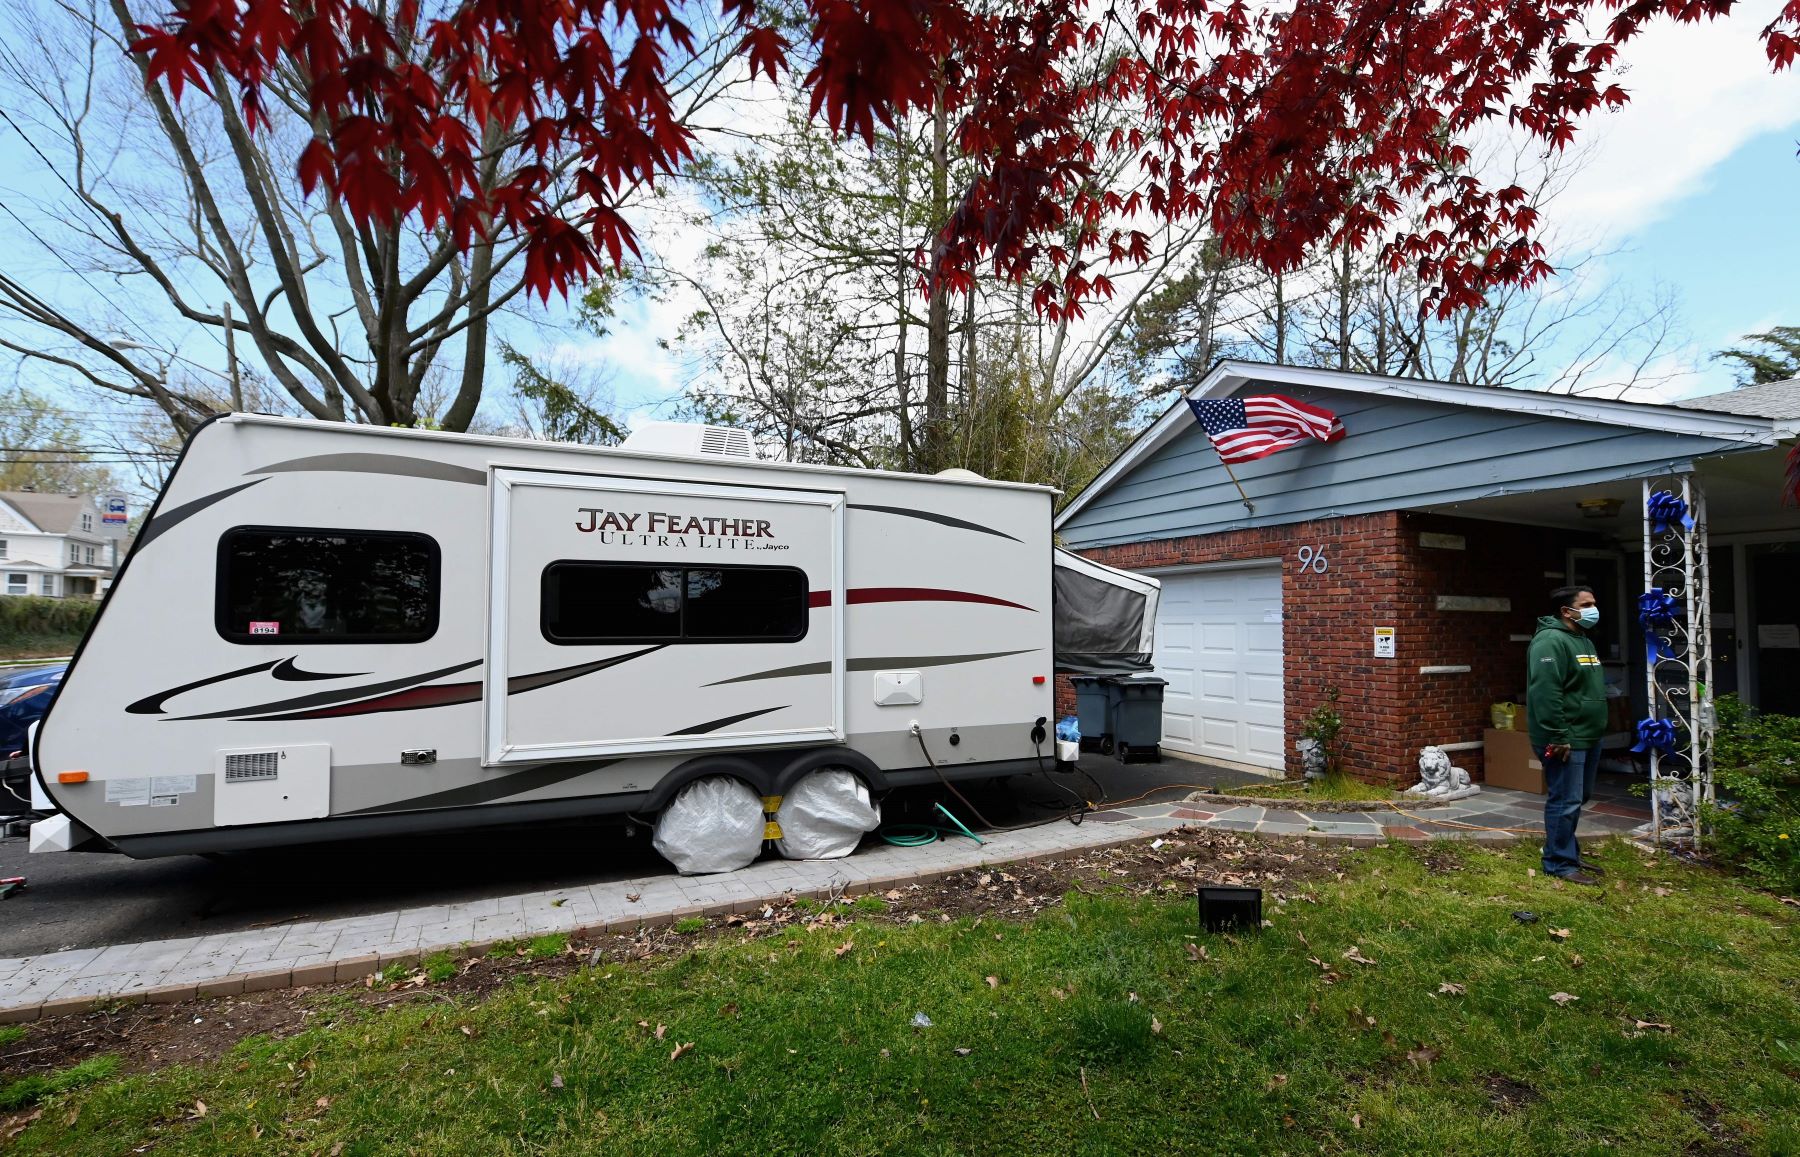 An RV parked in a home driveway in Nutley, New Jersey, which is an example of 'moochdocking'